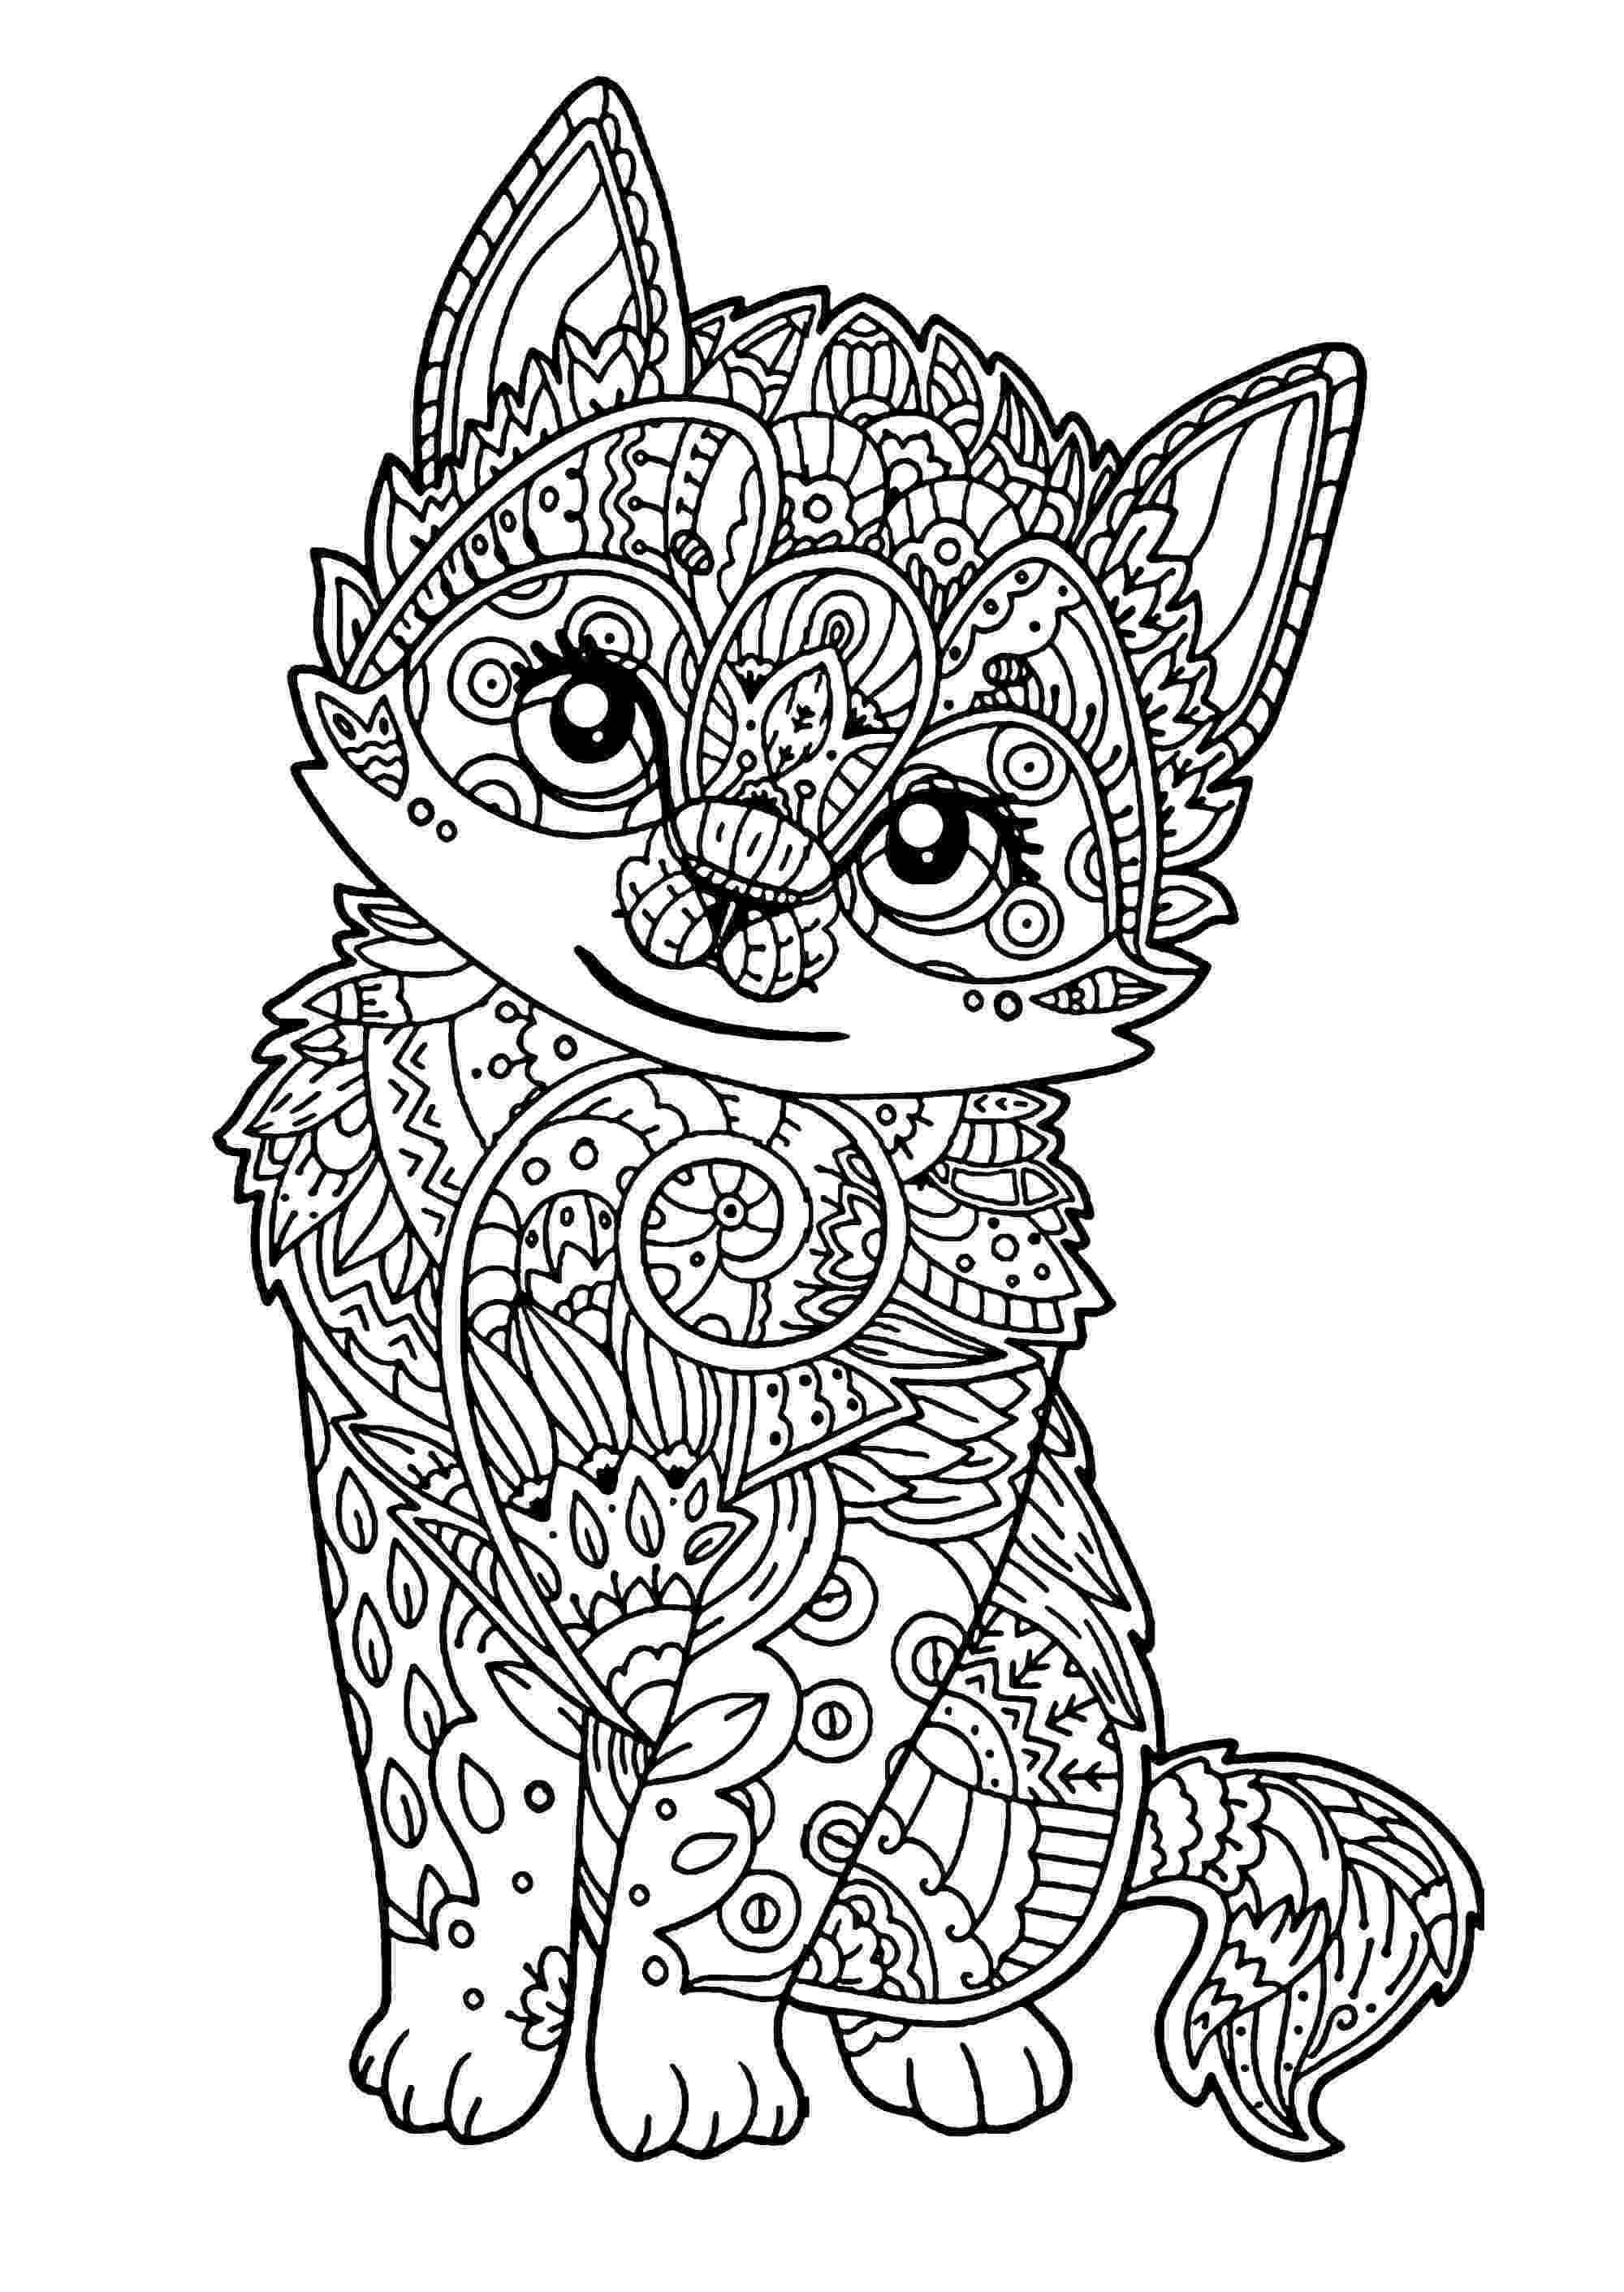 cat pictures for kids to color cat coloring pages for adults best coloring pages for kids for color pictures to cat kids 